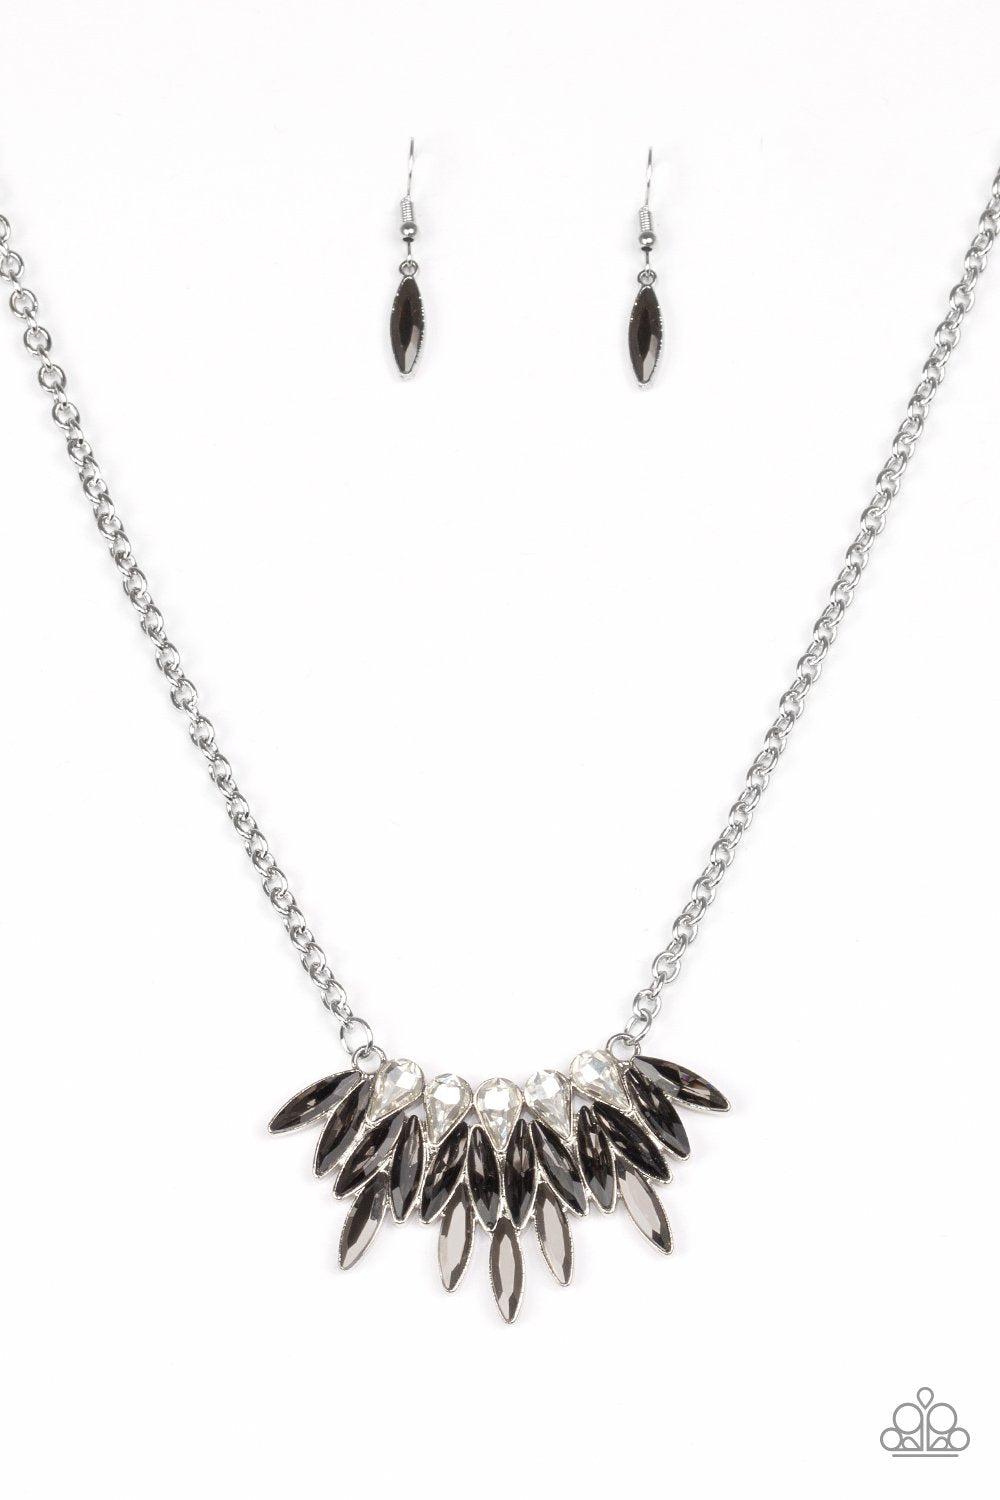 Crown Couture Silver and Hematite Necklace - Paparazzi Accessories-CarasShop.com - $5 Jewelry by Cara Jewels